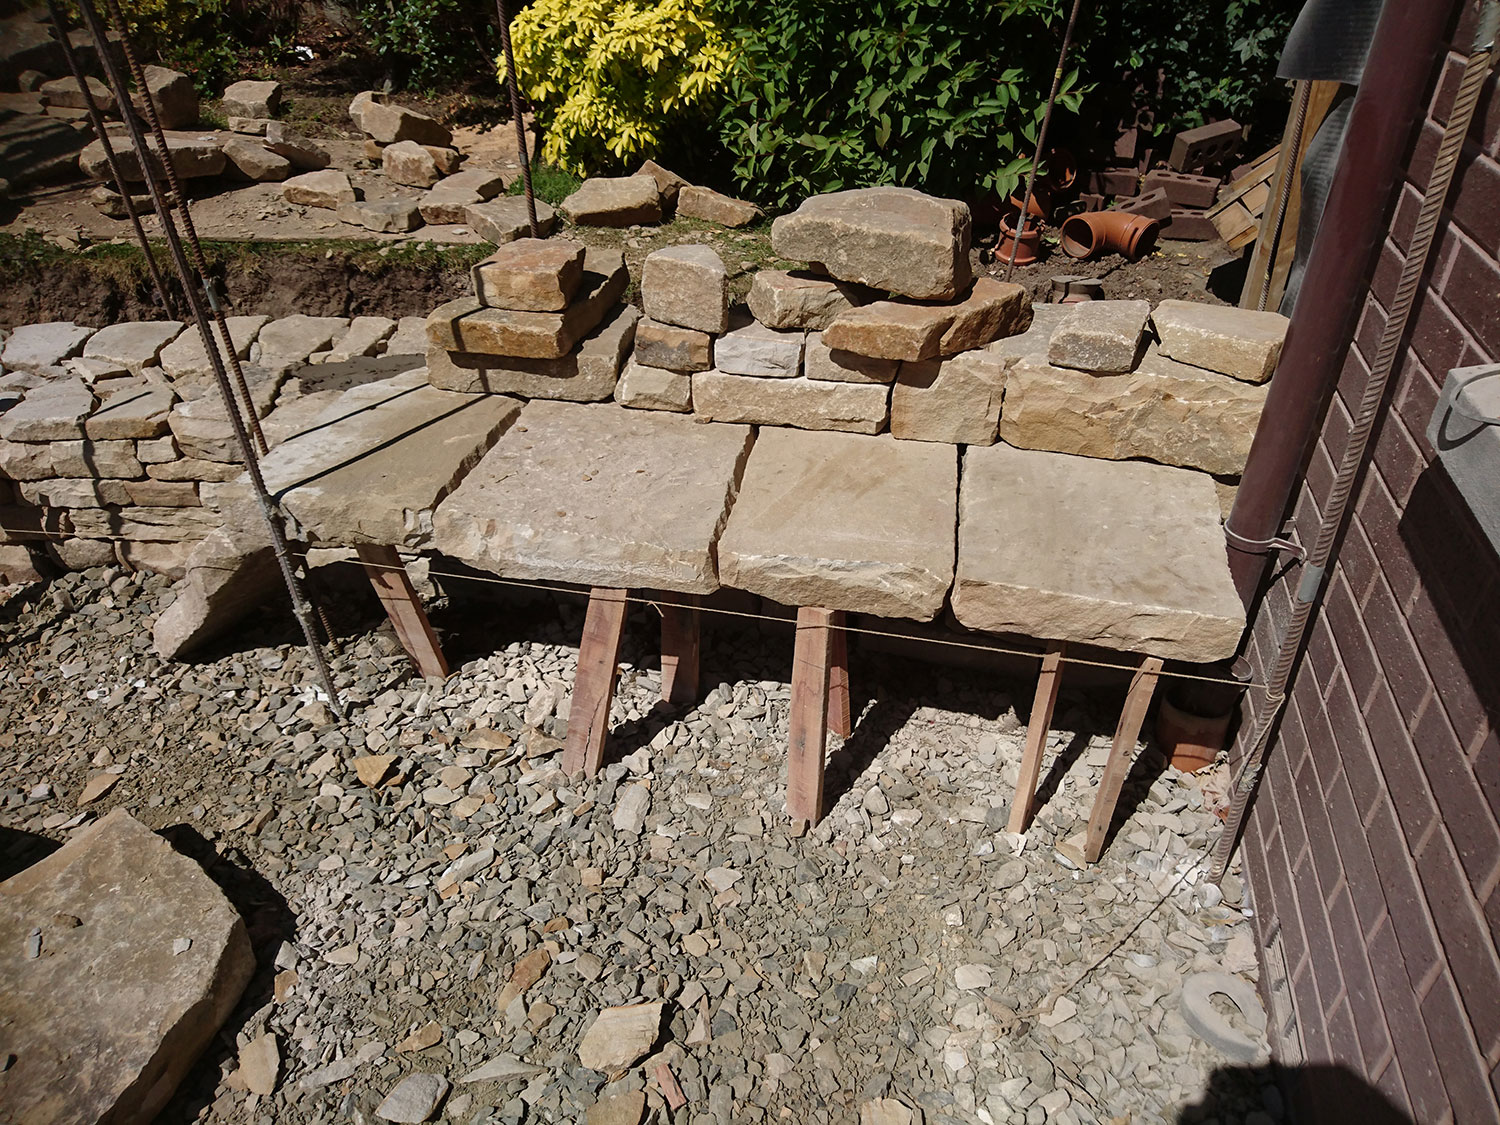 Putting together the large stones for the bench